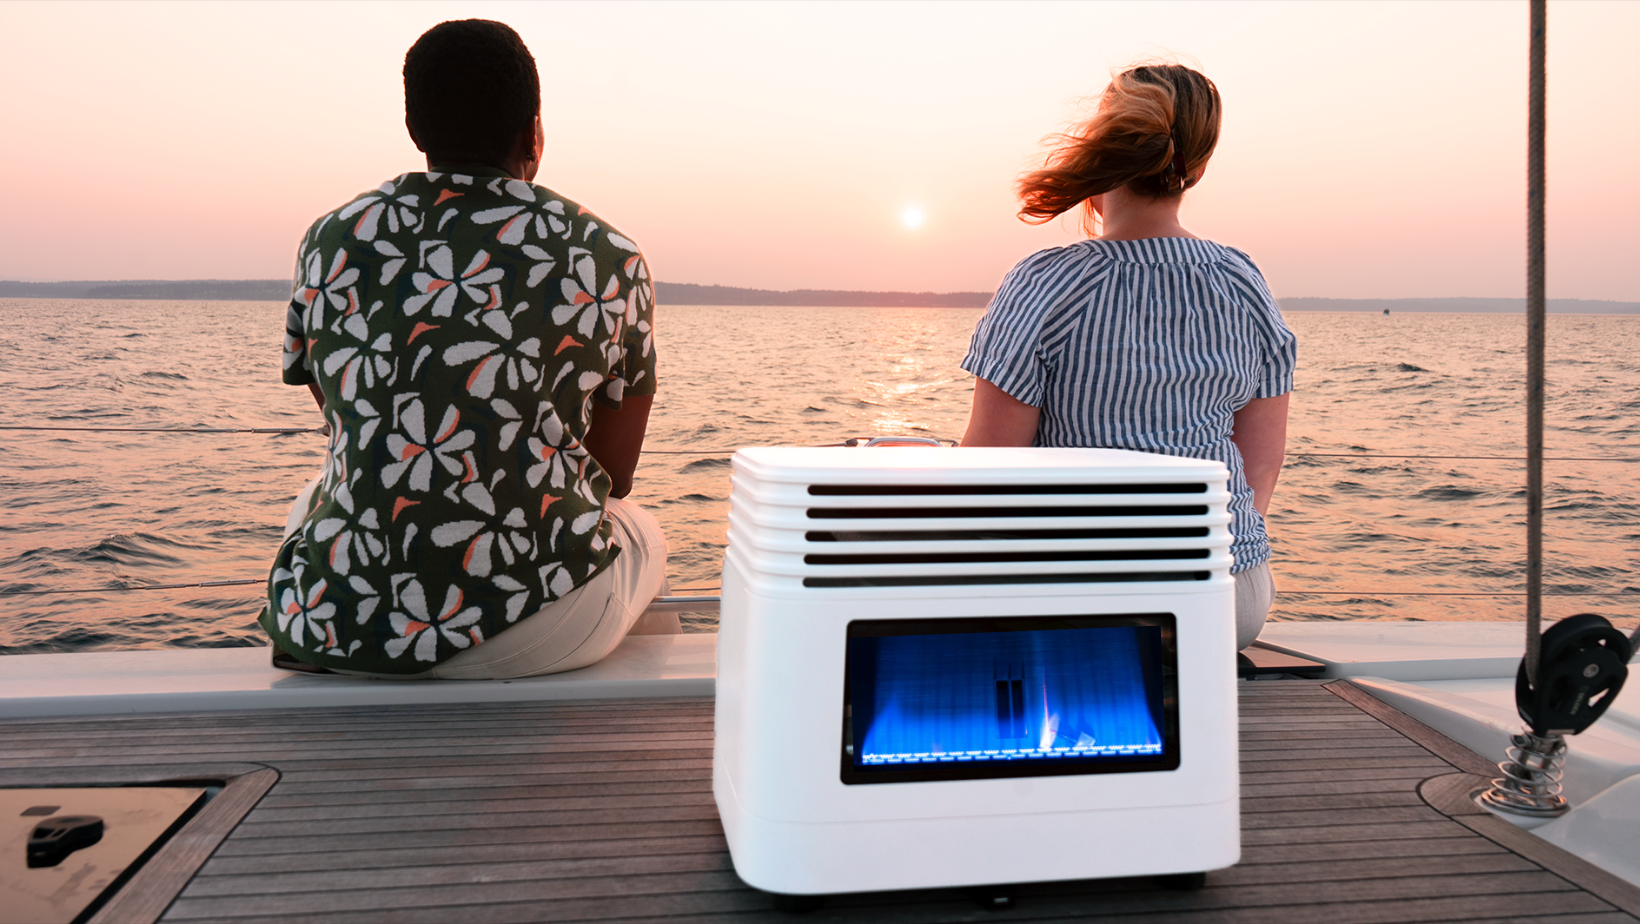 Premium high-efficiency self-powered hybrid forced air propane heater and boat heater. 